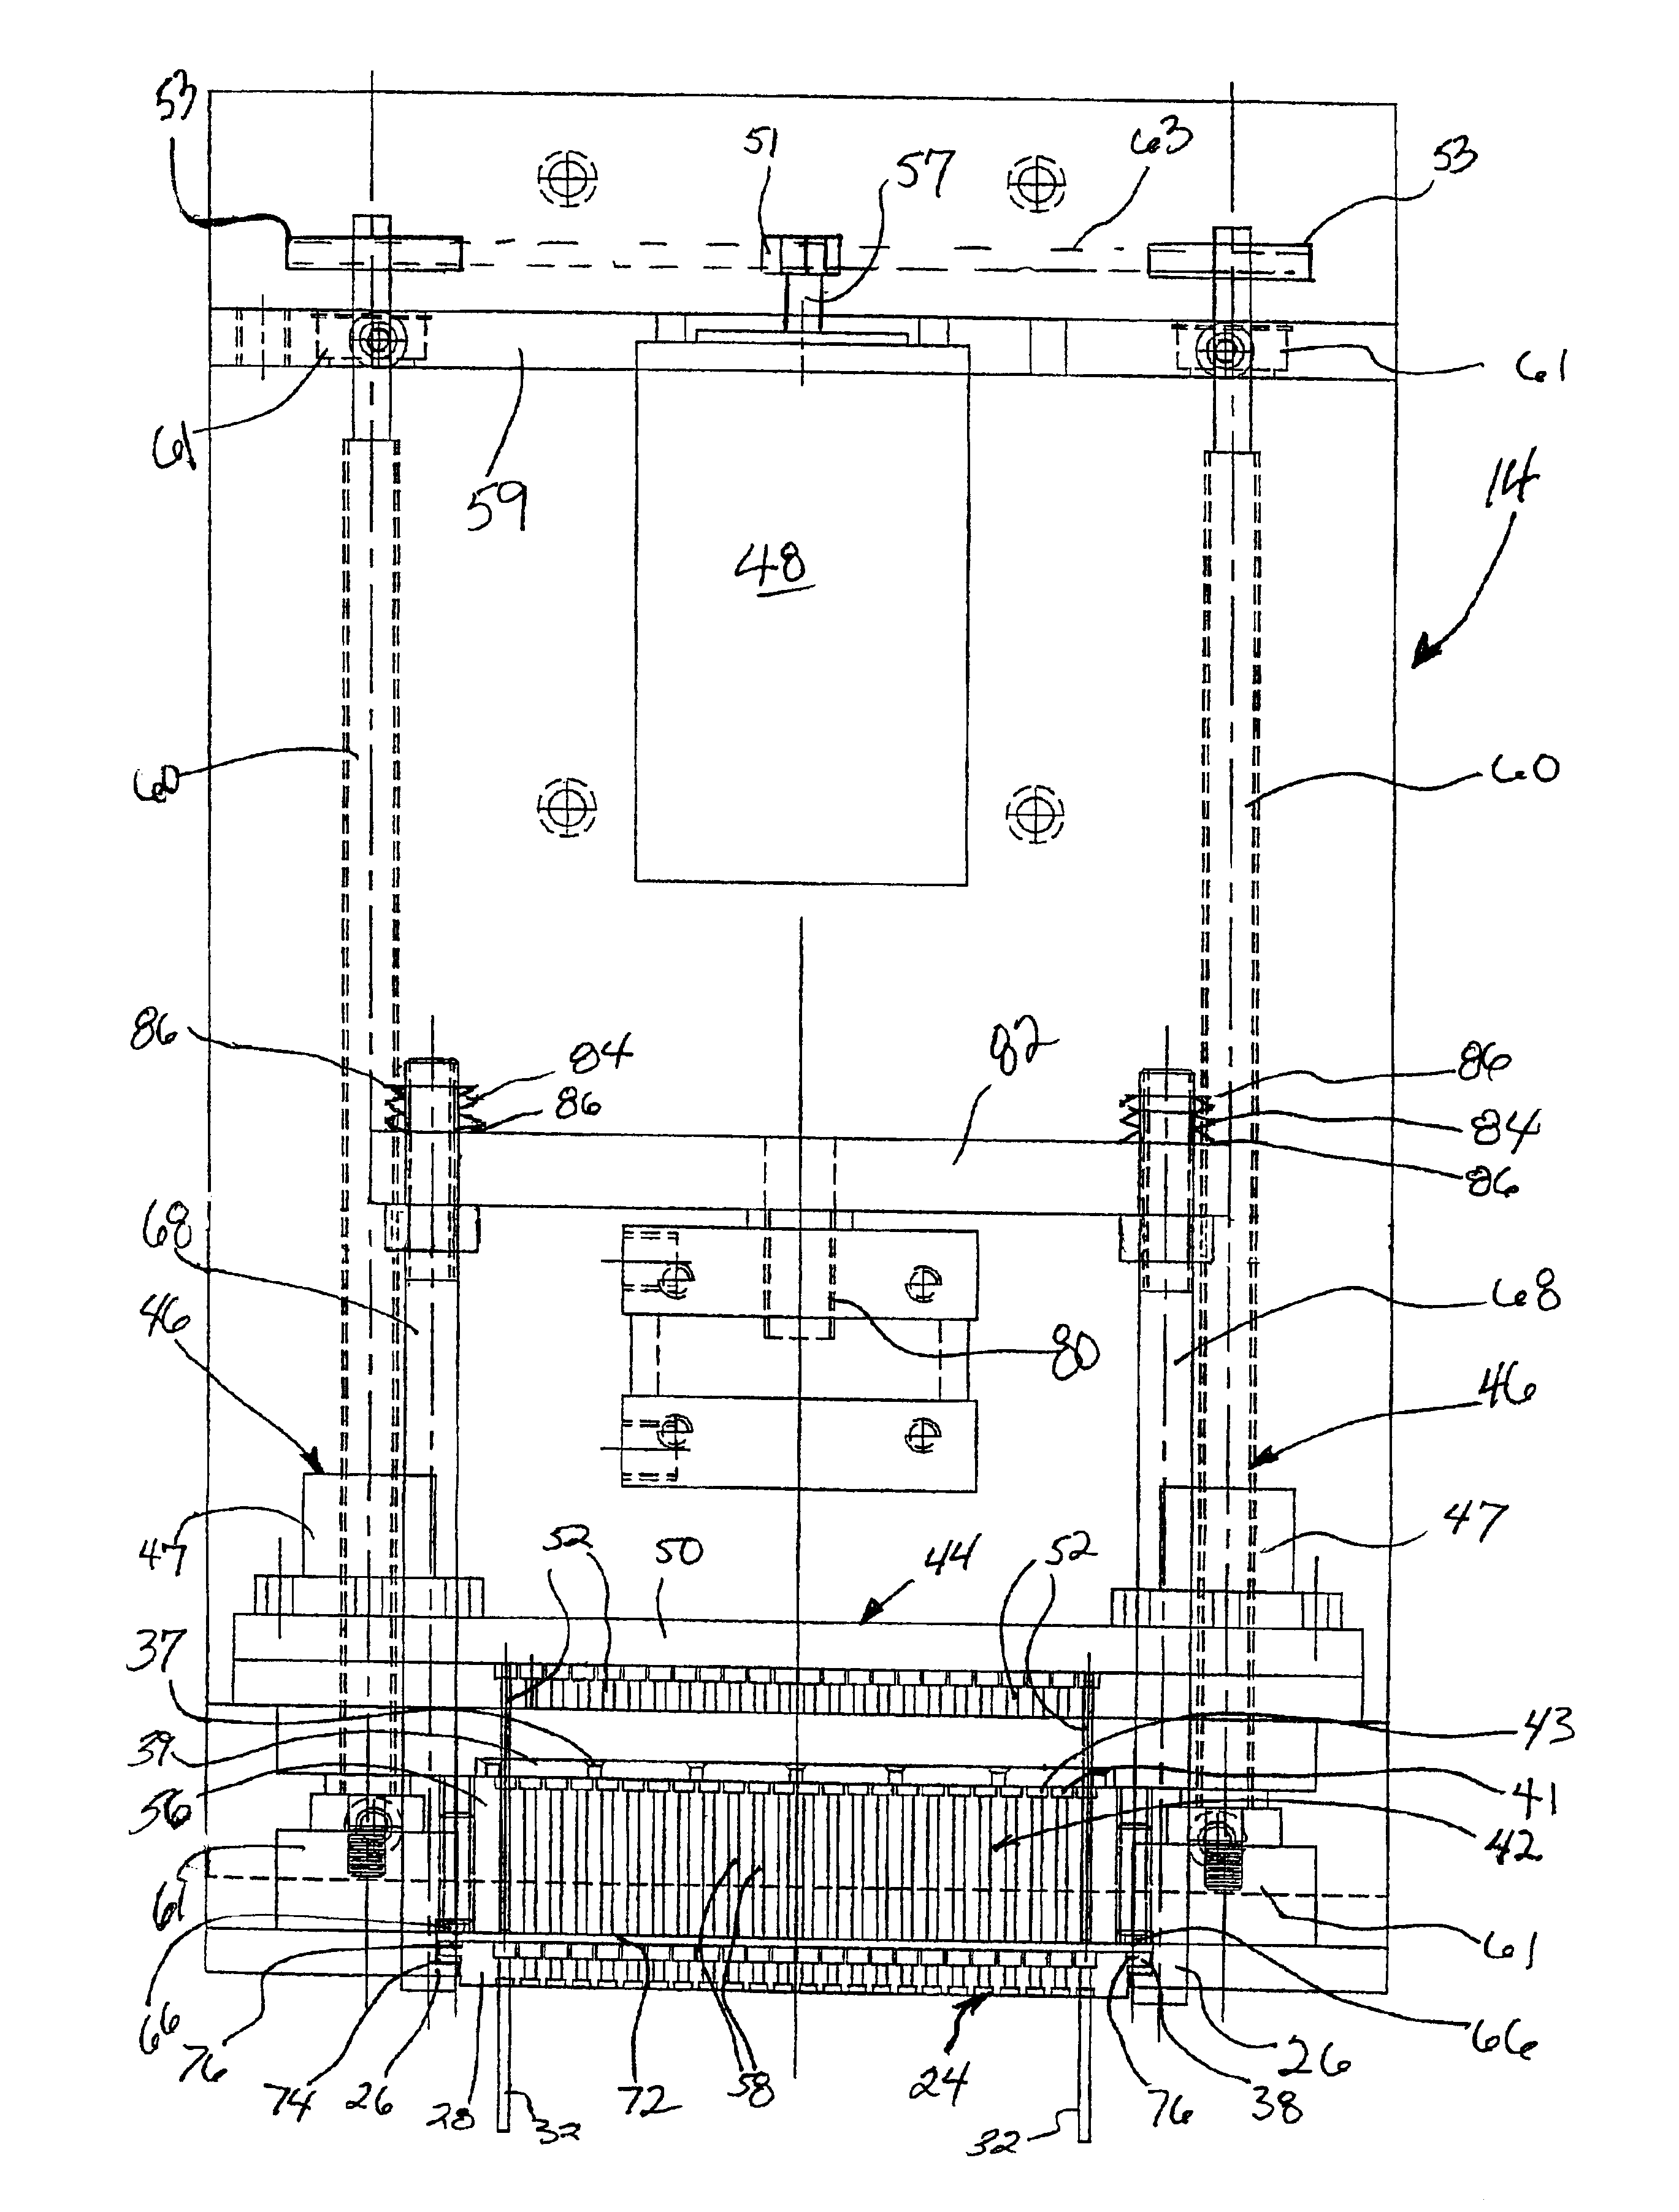 Liquid handling system with automatically interchangeable cannula array